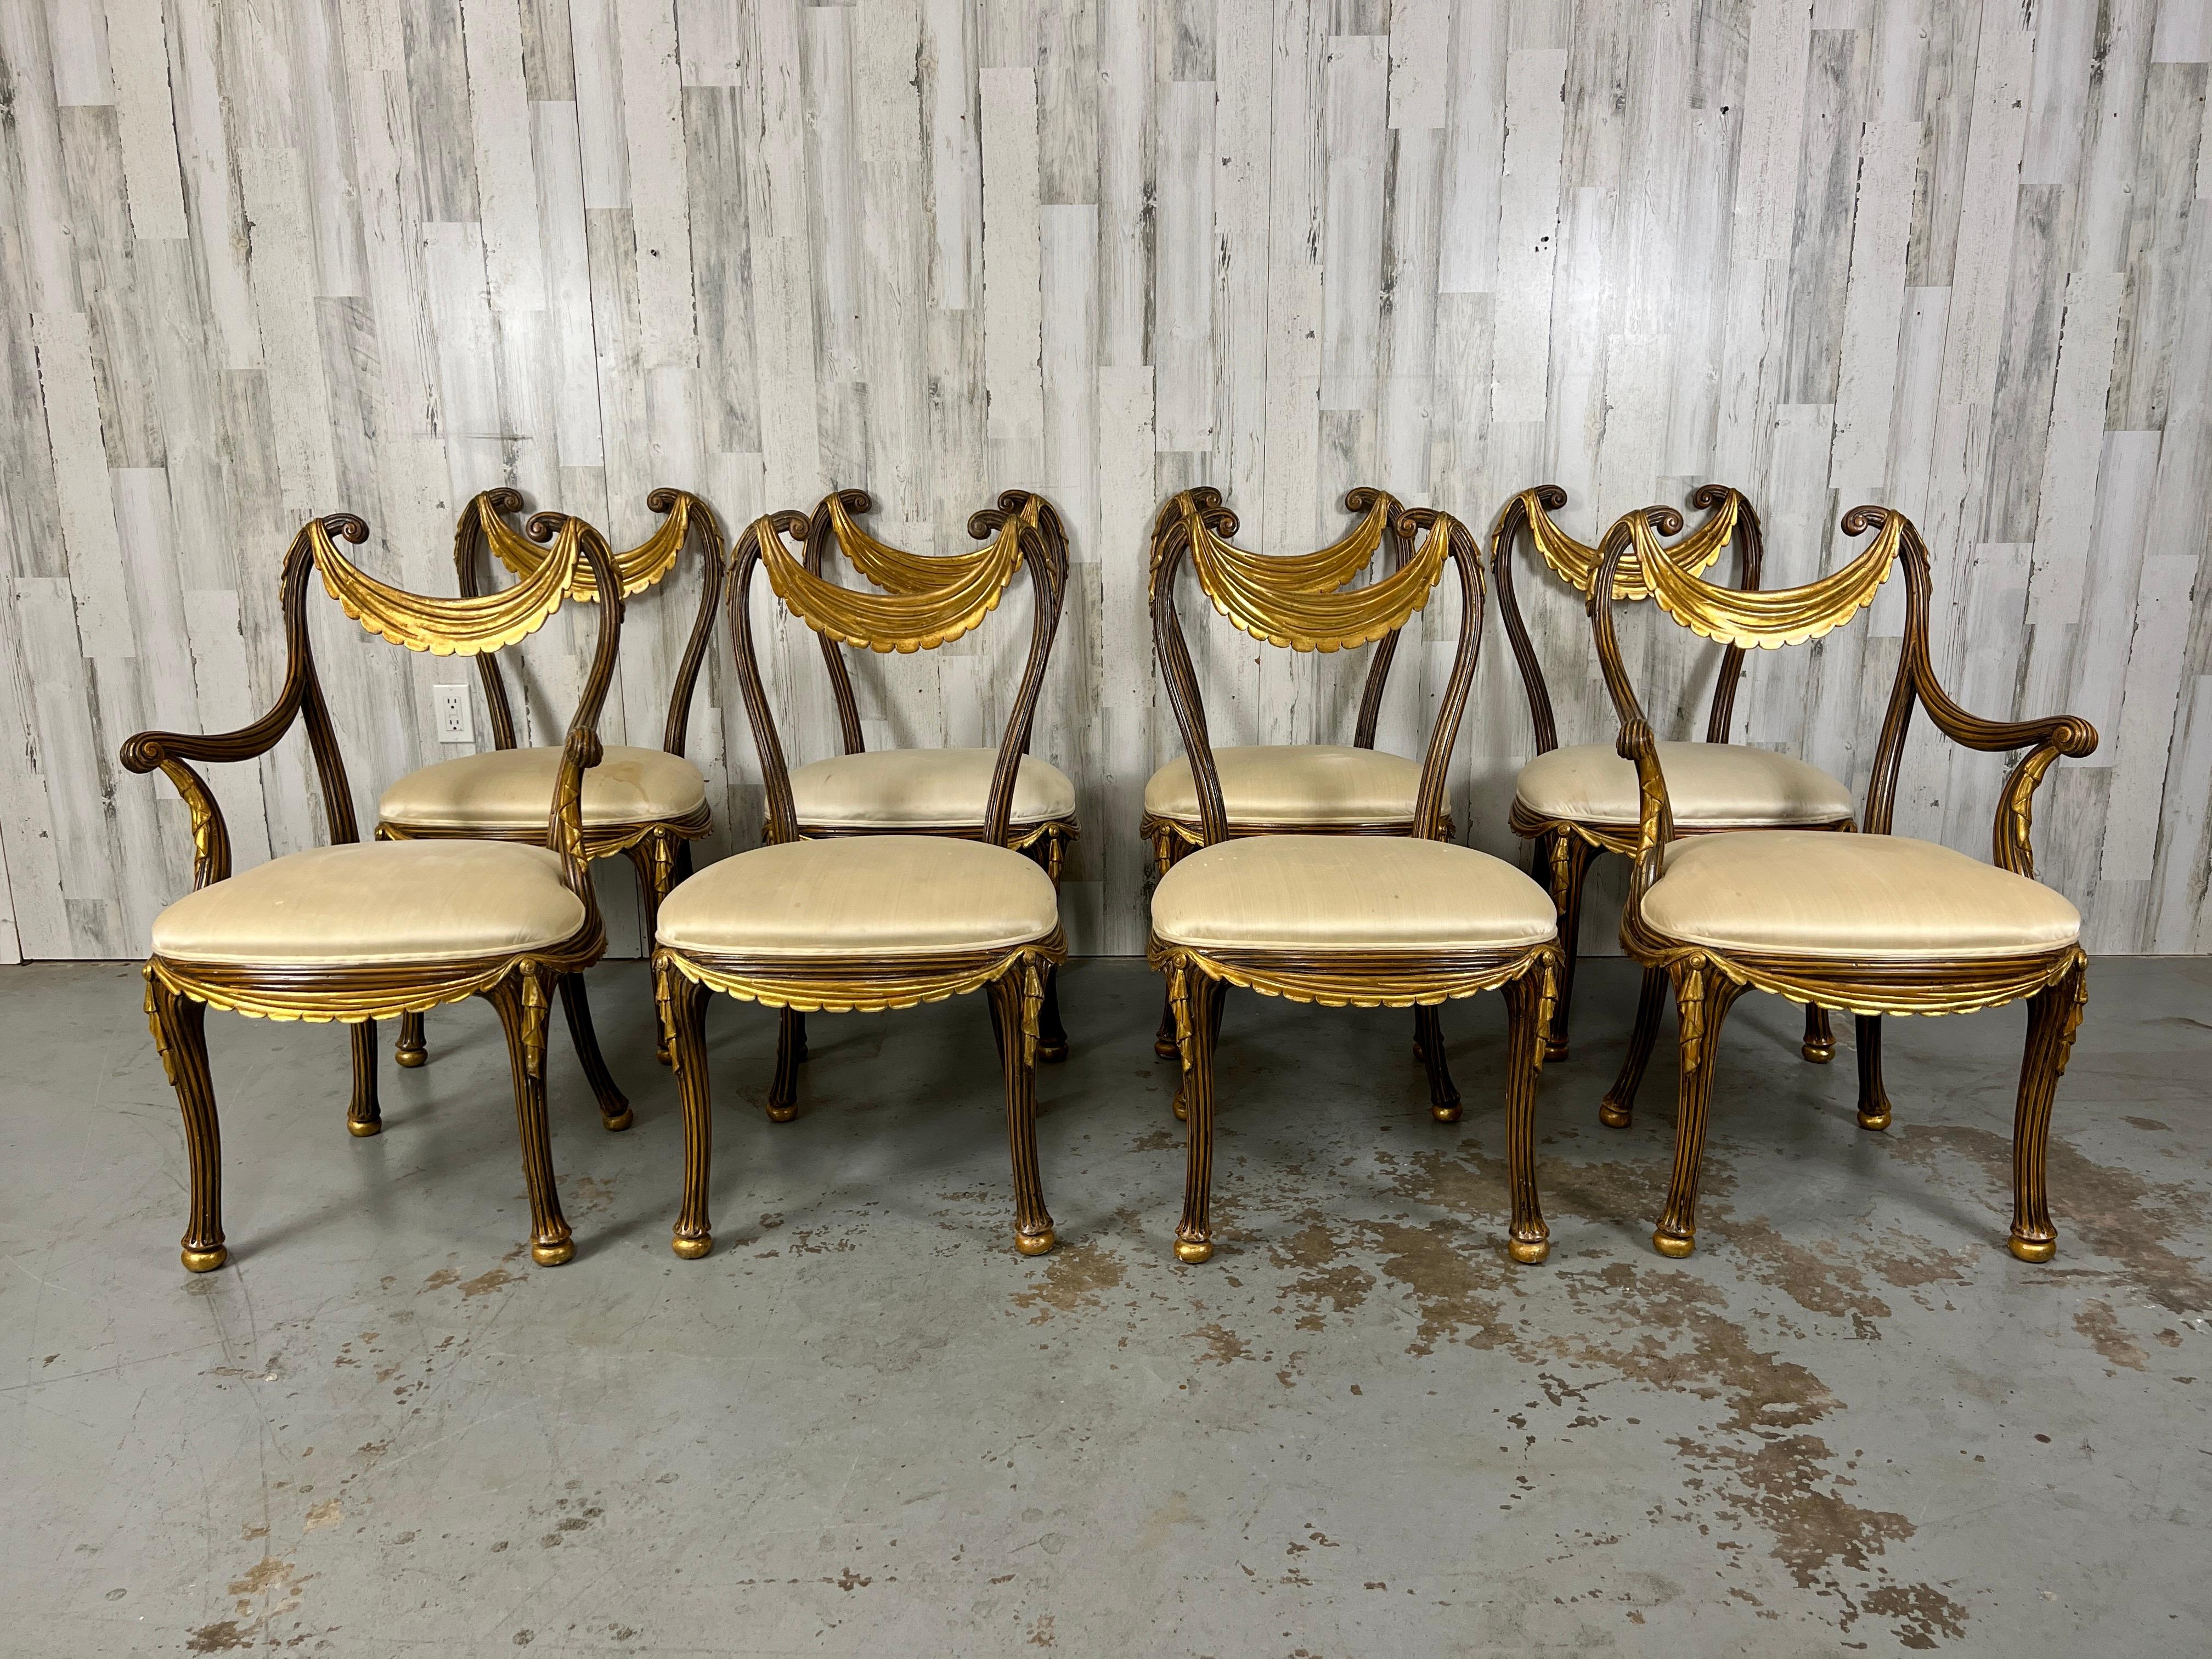 Very rare set of eight, two arm and six side gilt wood Dining chairs. A combination of wood, gesso, gilt and upholstery make these chairs stunning from all angles. Very sturdy and in very good vintage condition. Arm Chairs are 23.5